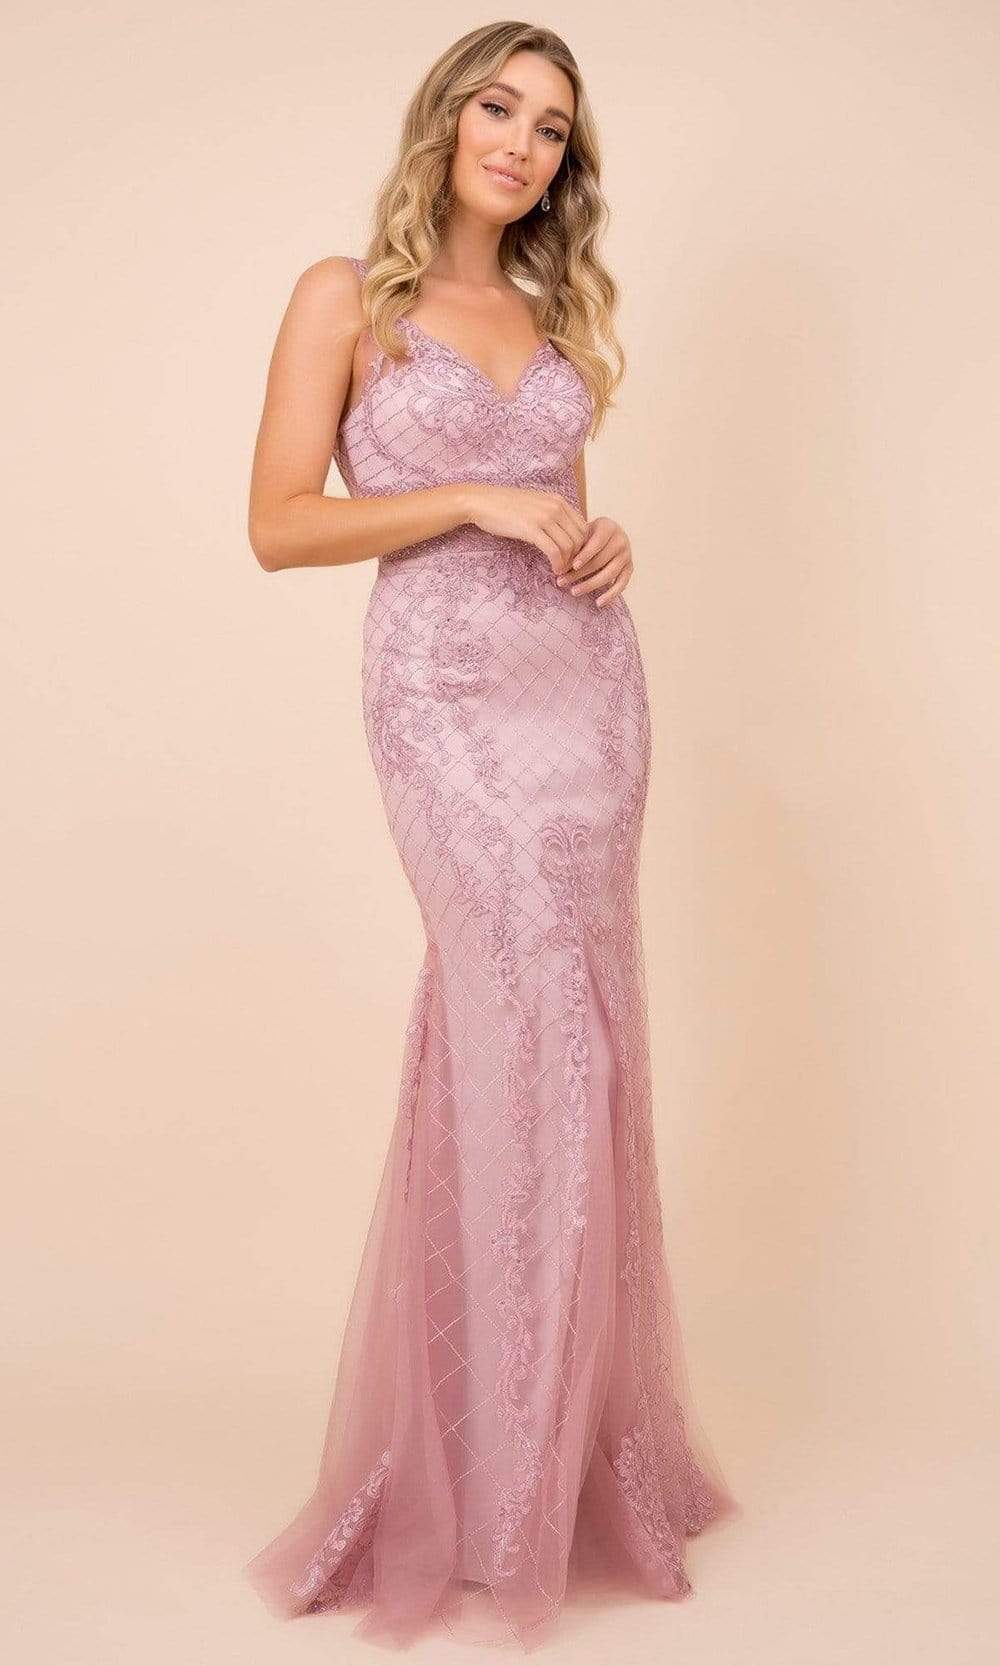 Nox Anabel - A398 Sleeveless V Neck Beaded Lace Applique Trumpet Gown
